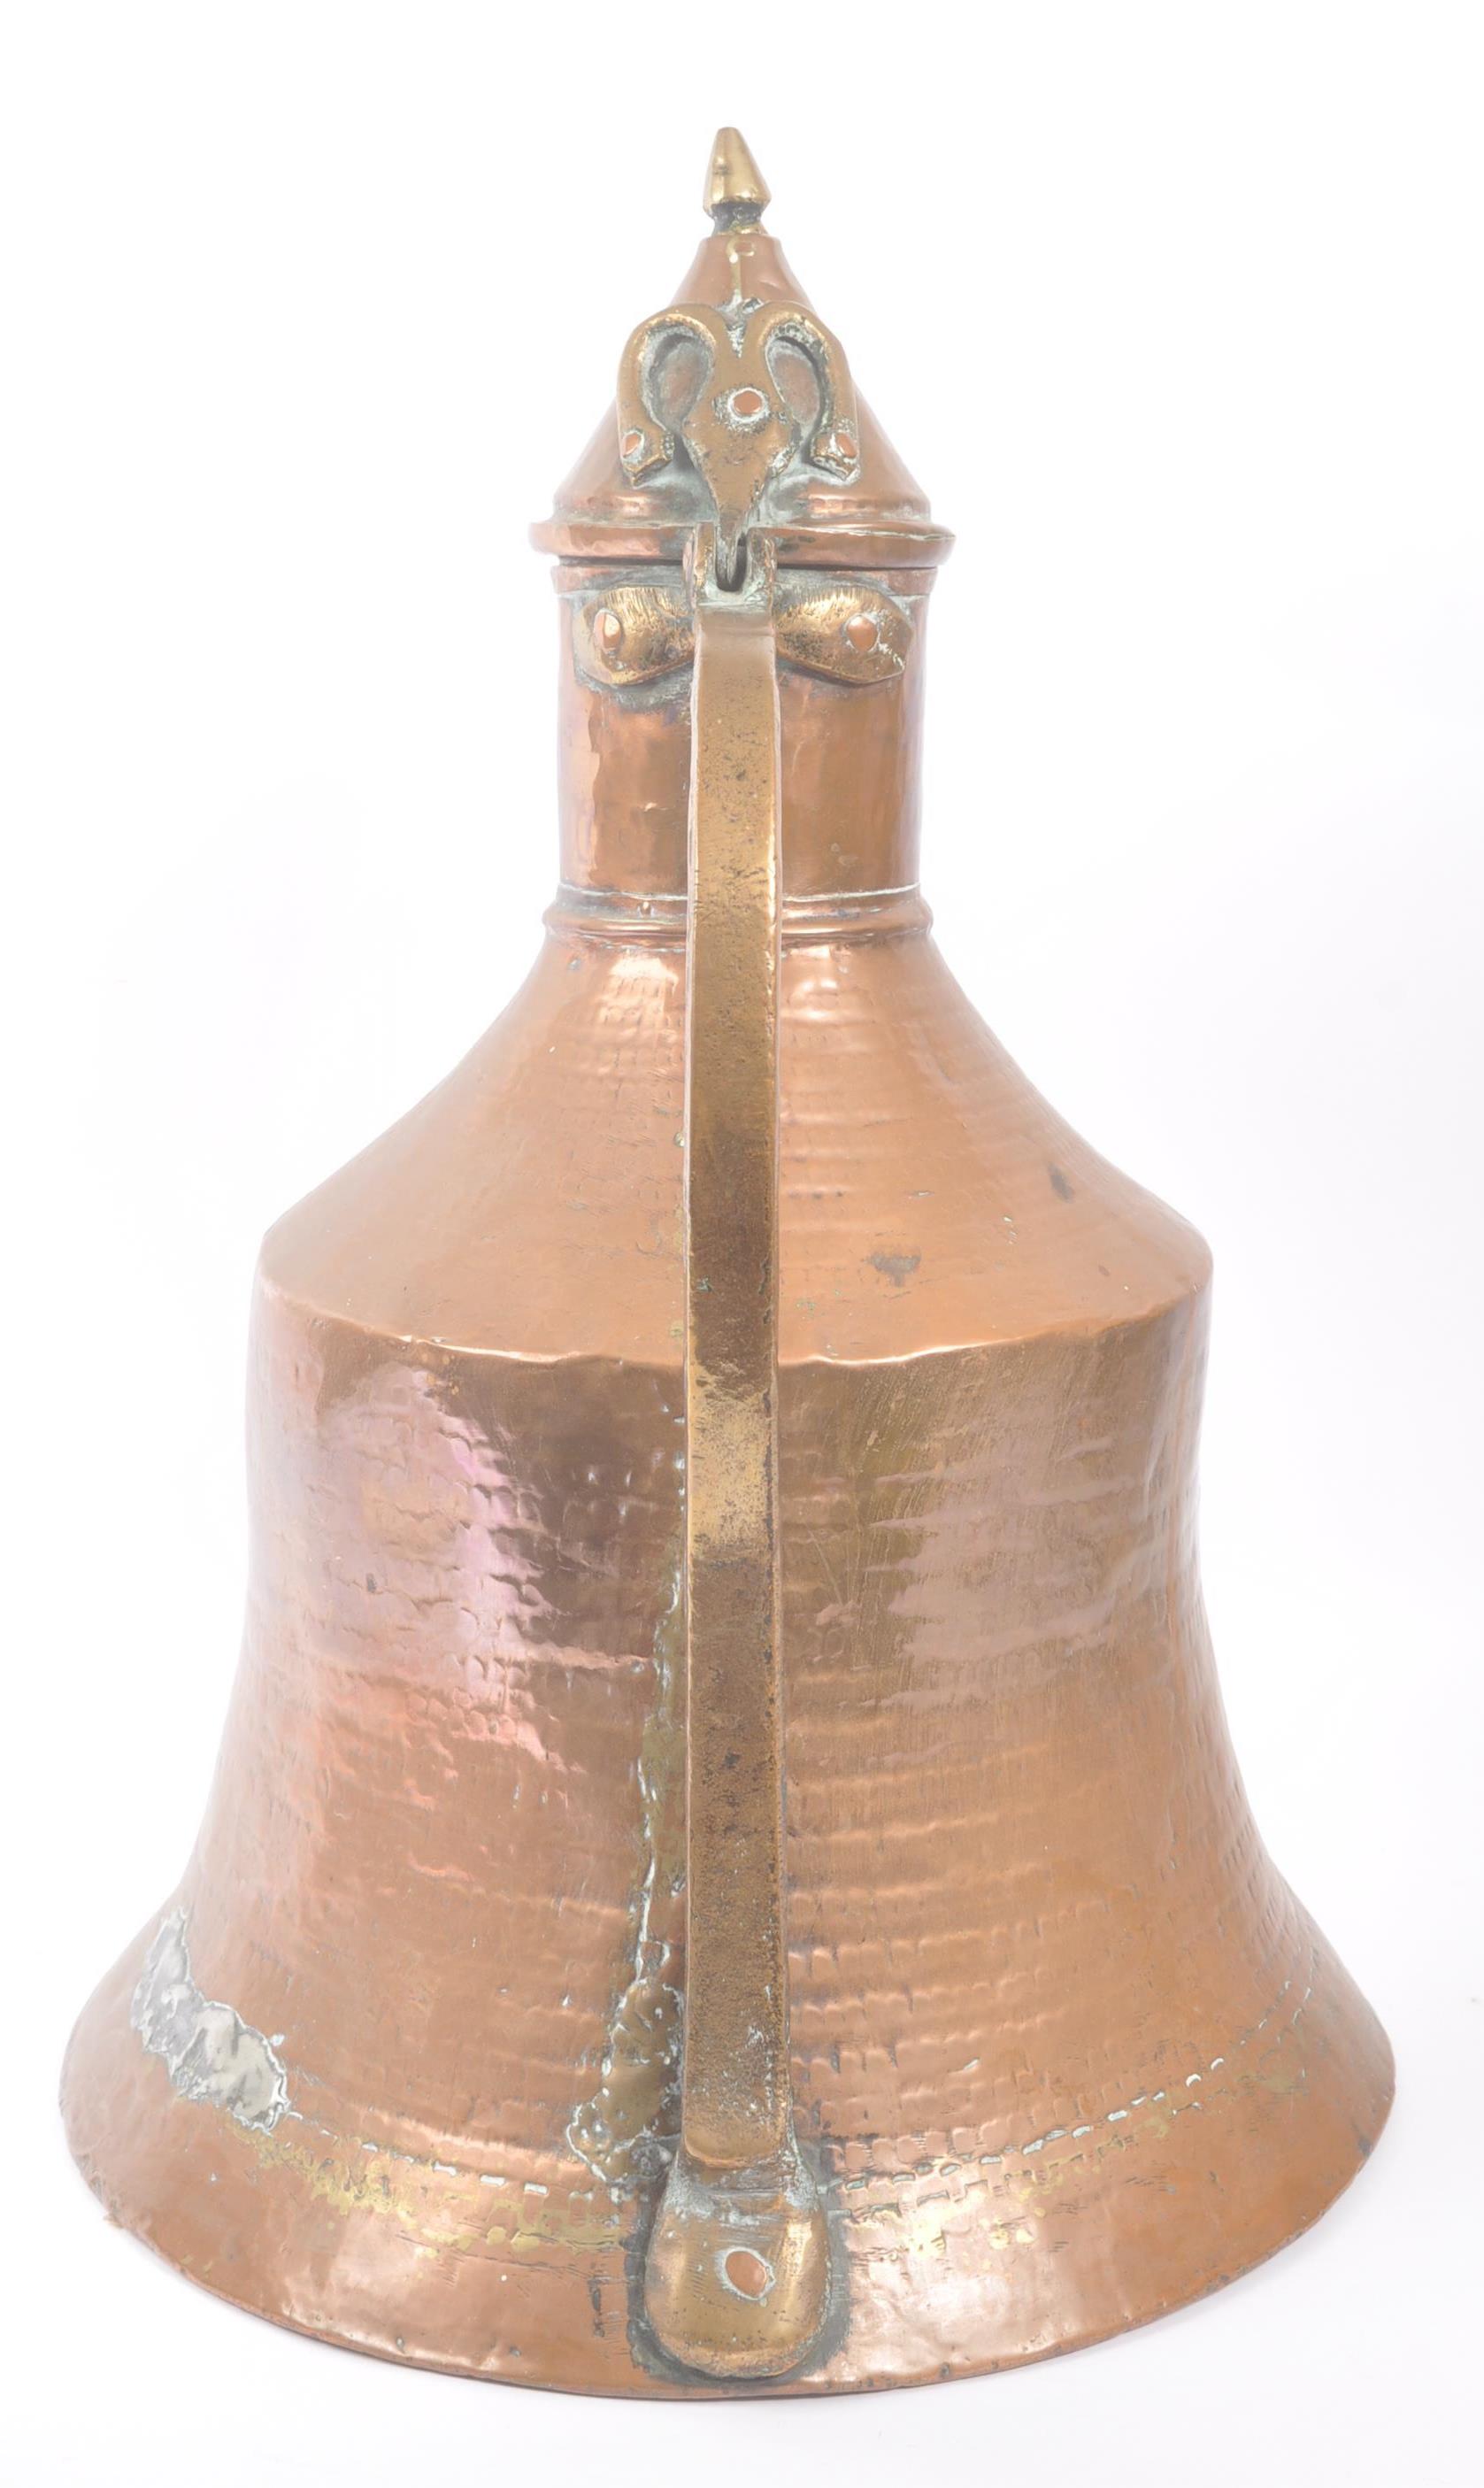 LARGE 19TH CENTURY HAMMERED COPPER EWER - Image 2 of 5